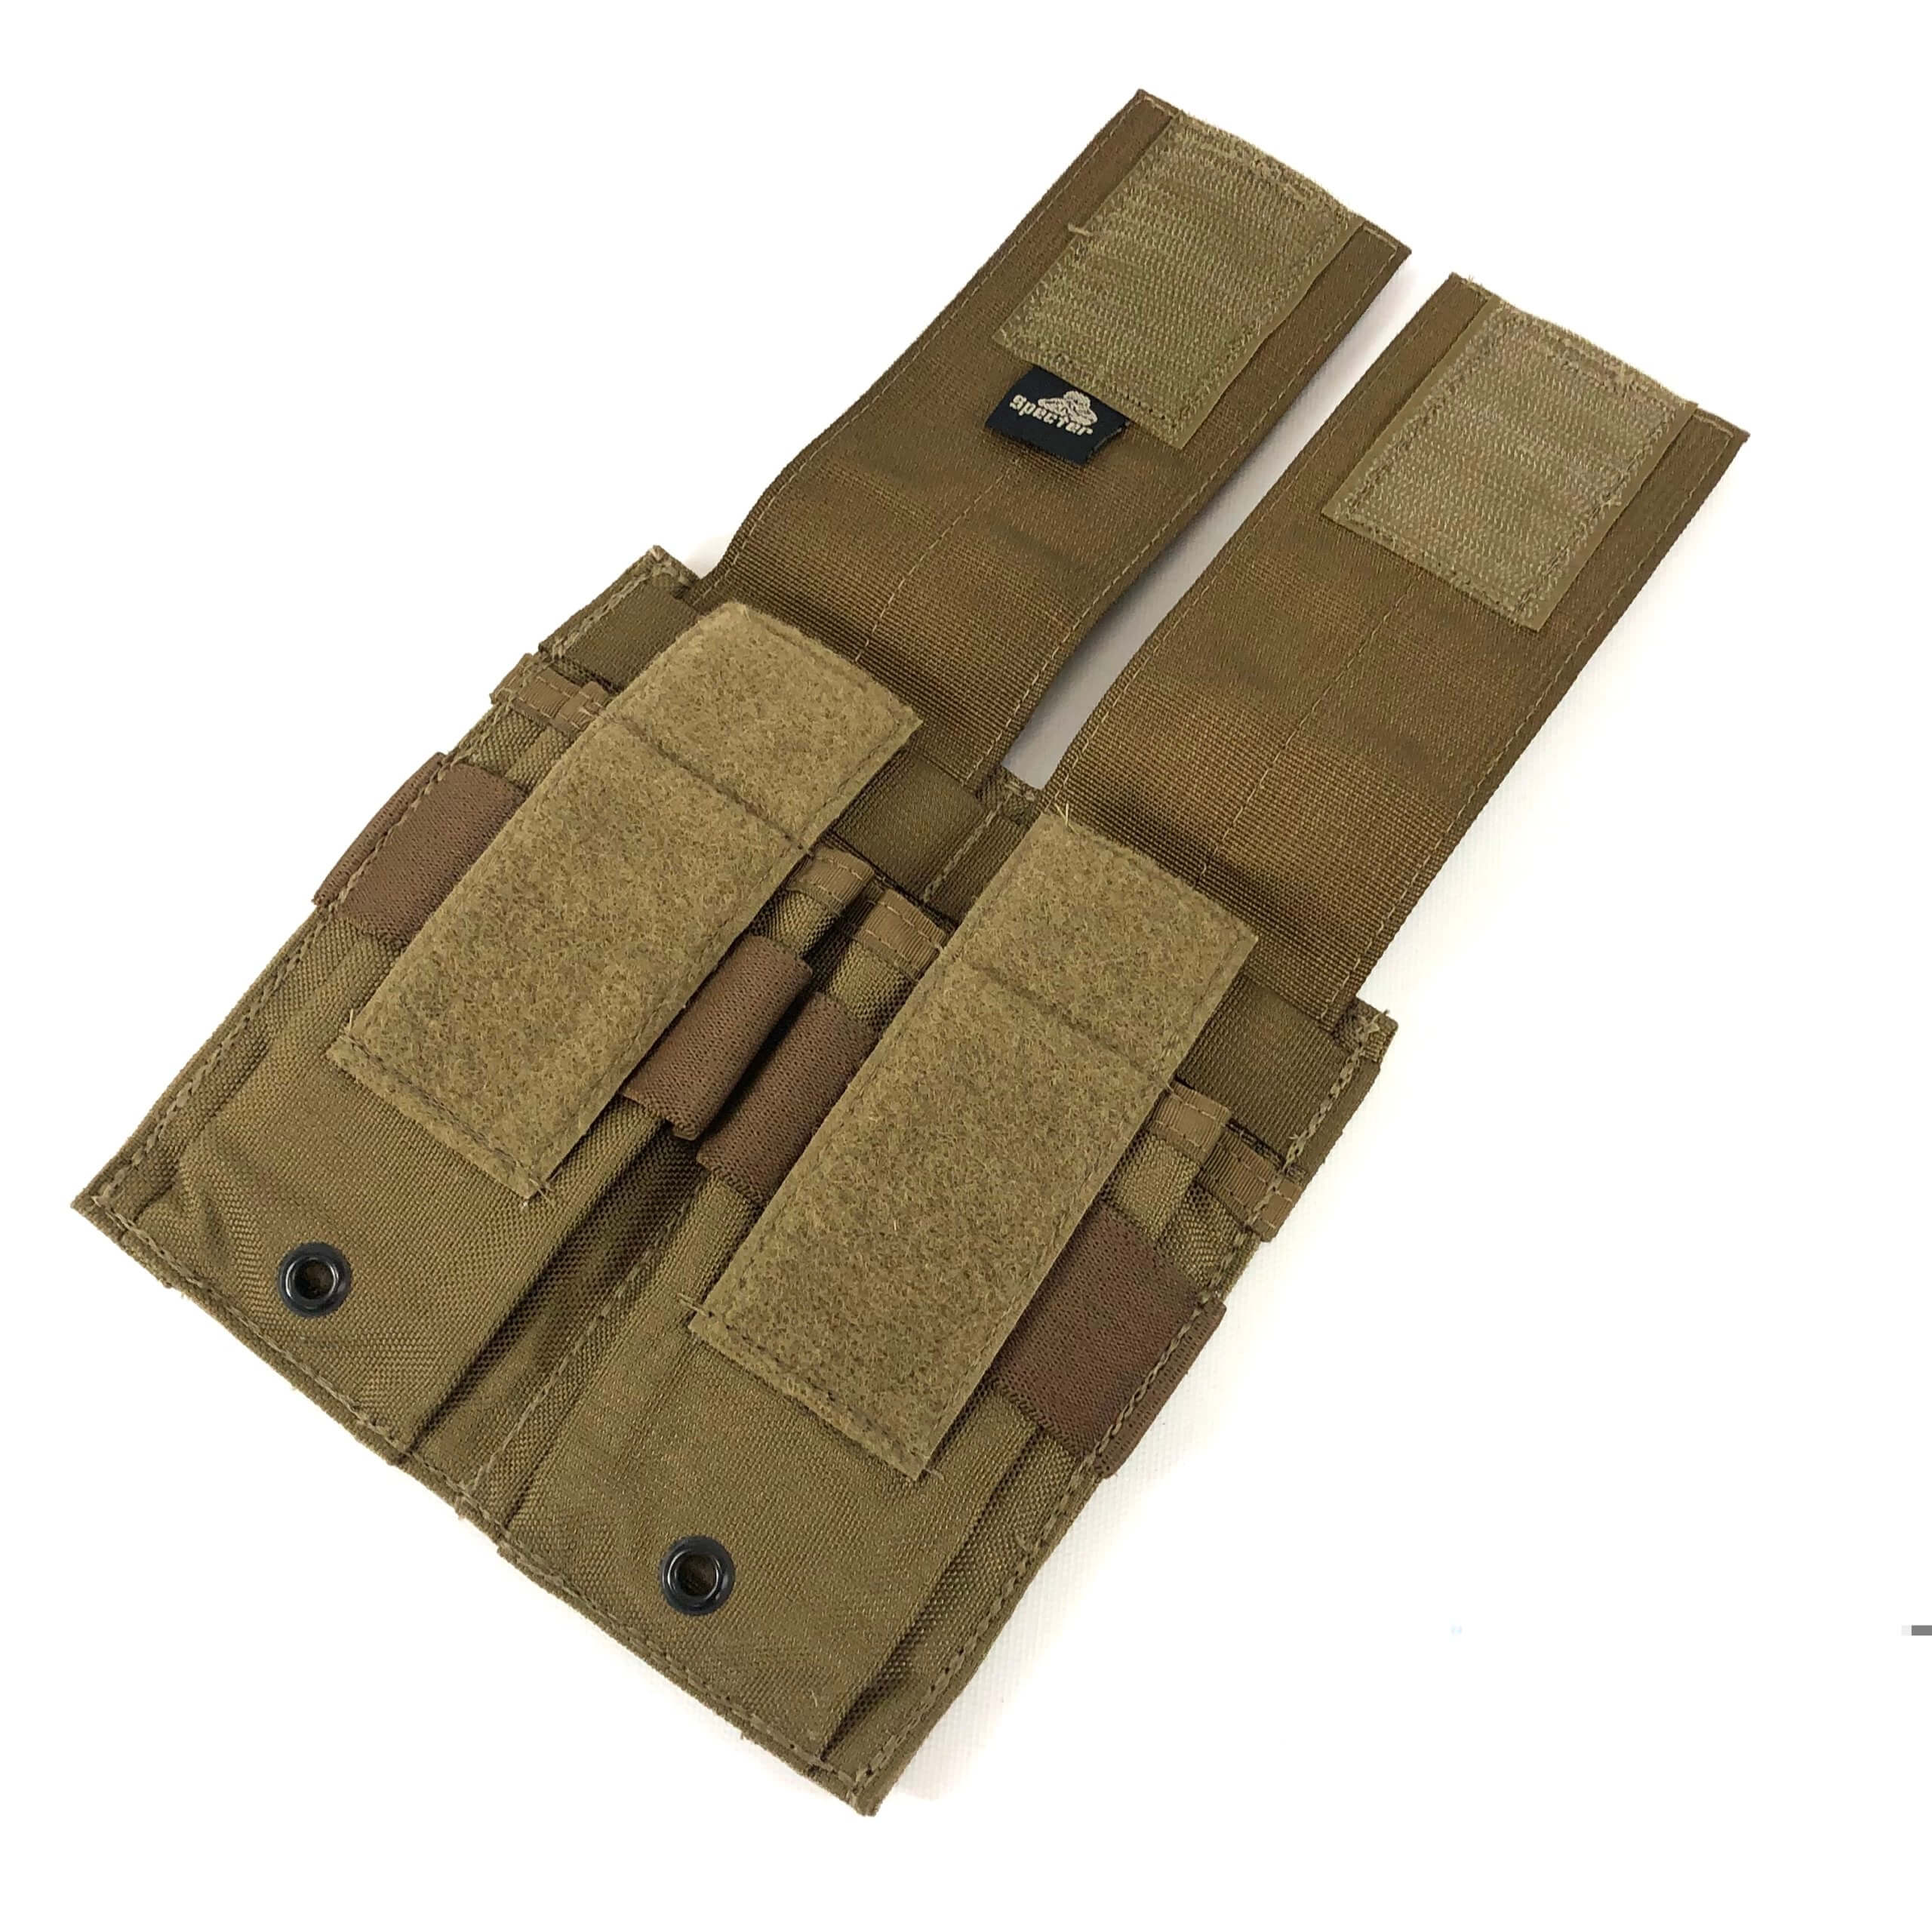 Military Double 2x2 Magazine Coyote Brown USMC Details about   Specter Gear Mag Pouch 